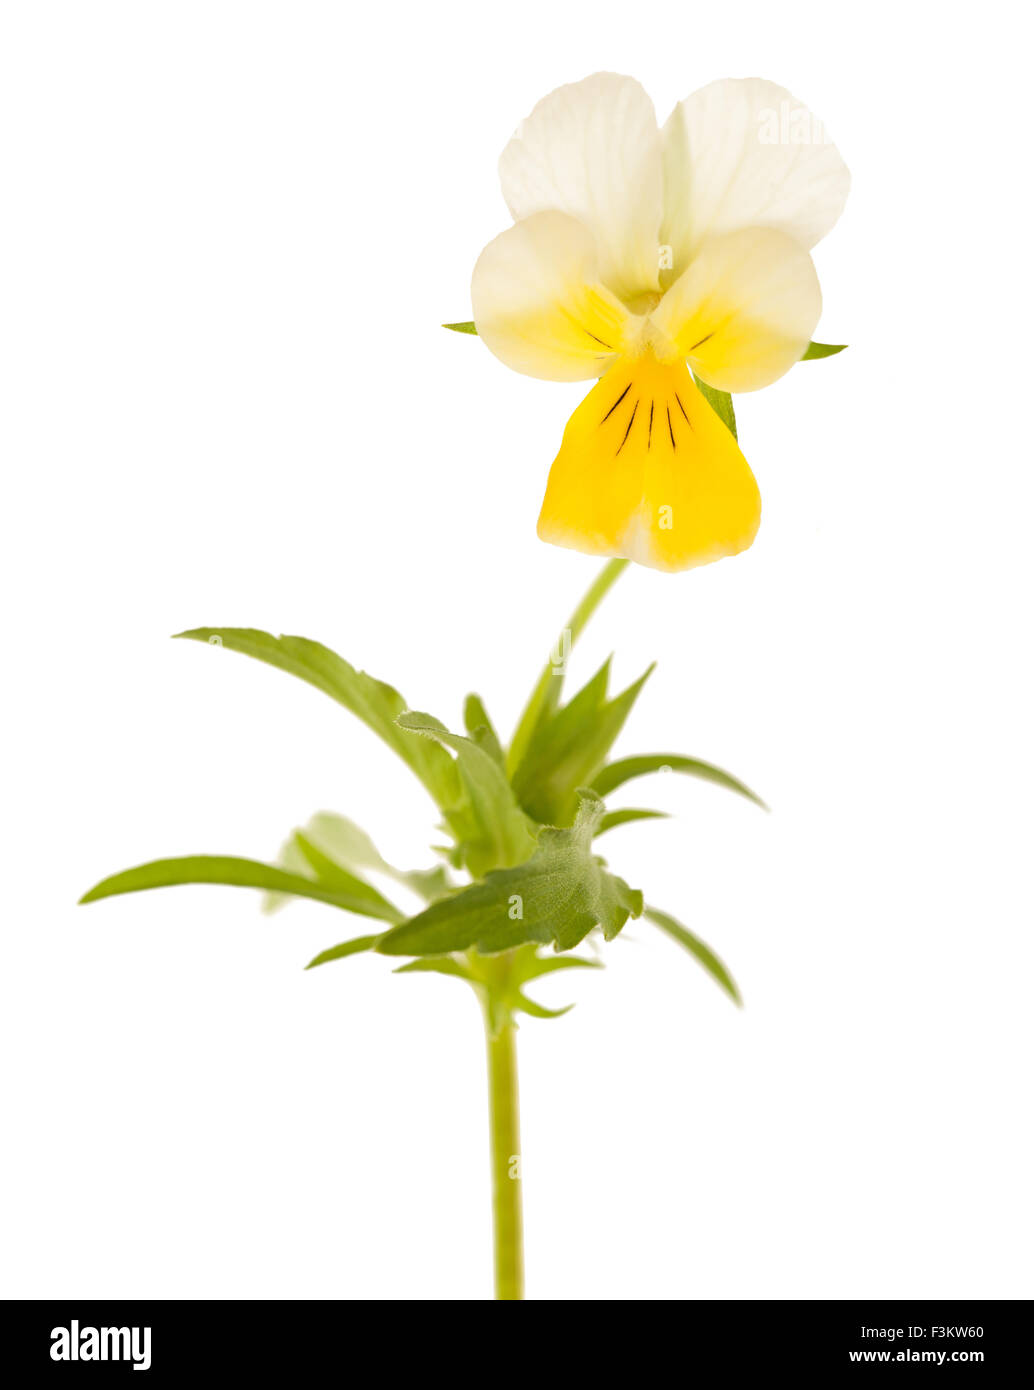 Pansy flower isolated on white Stock Photo